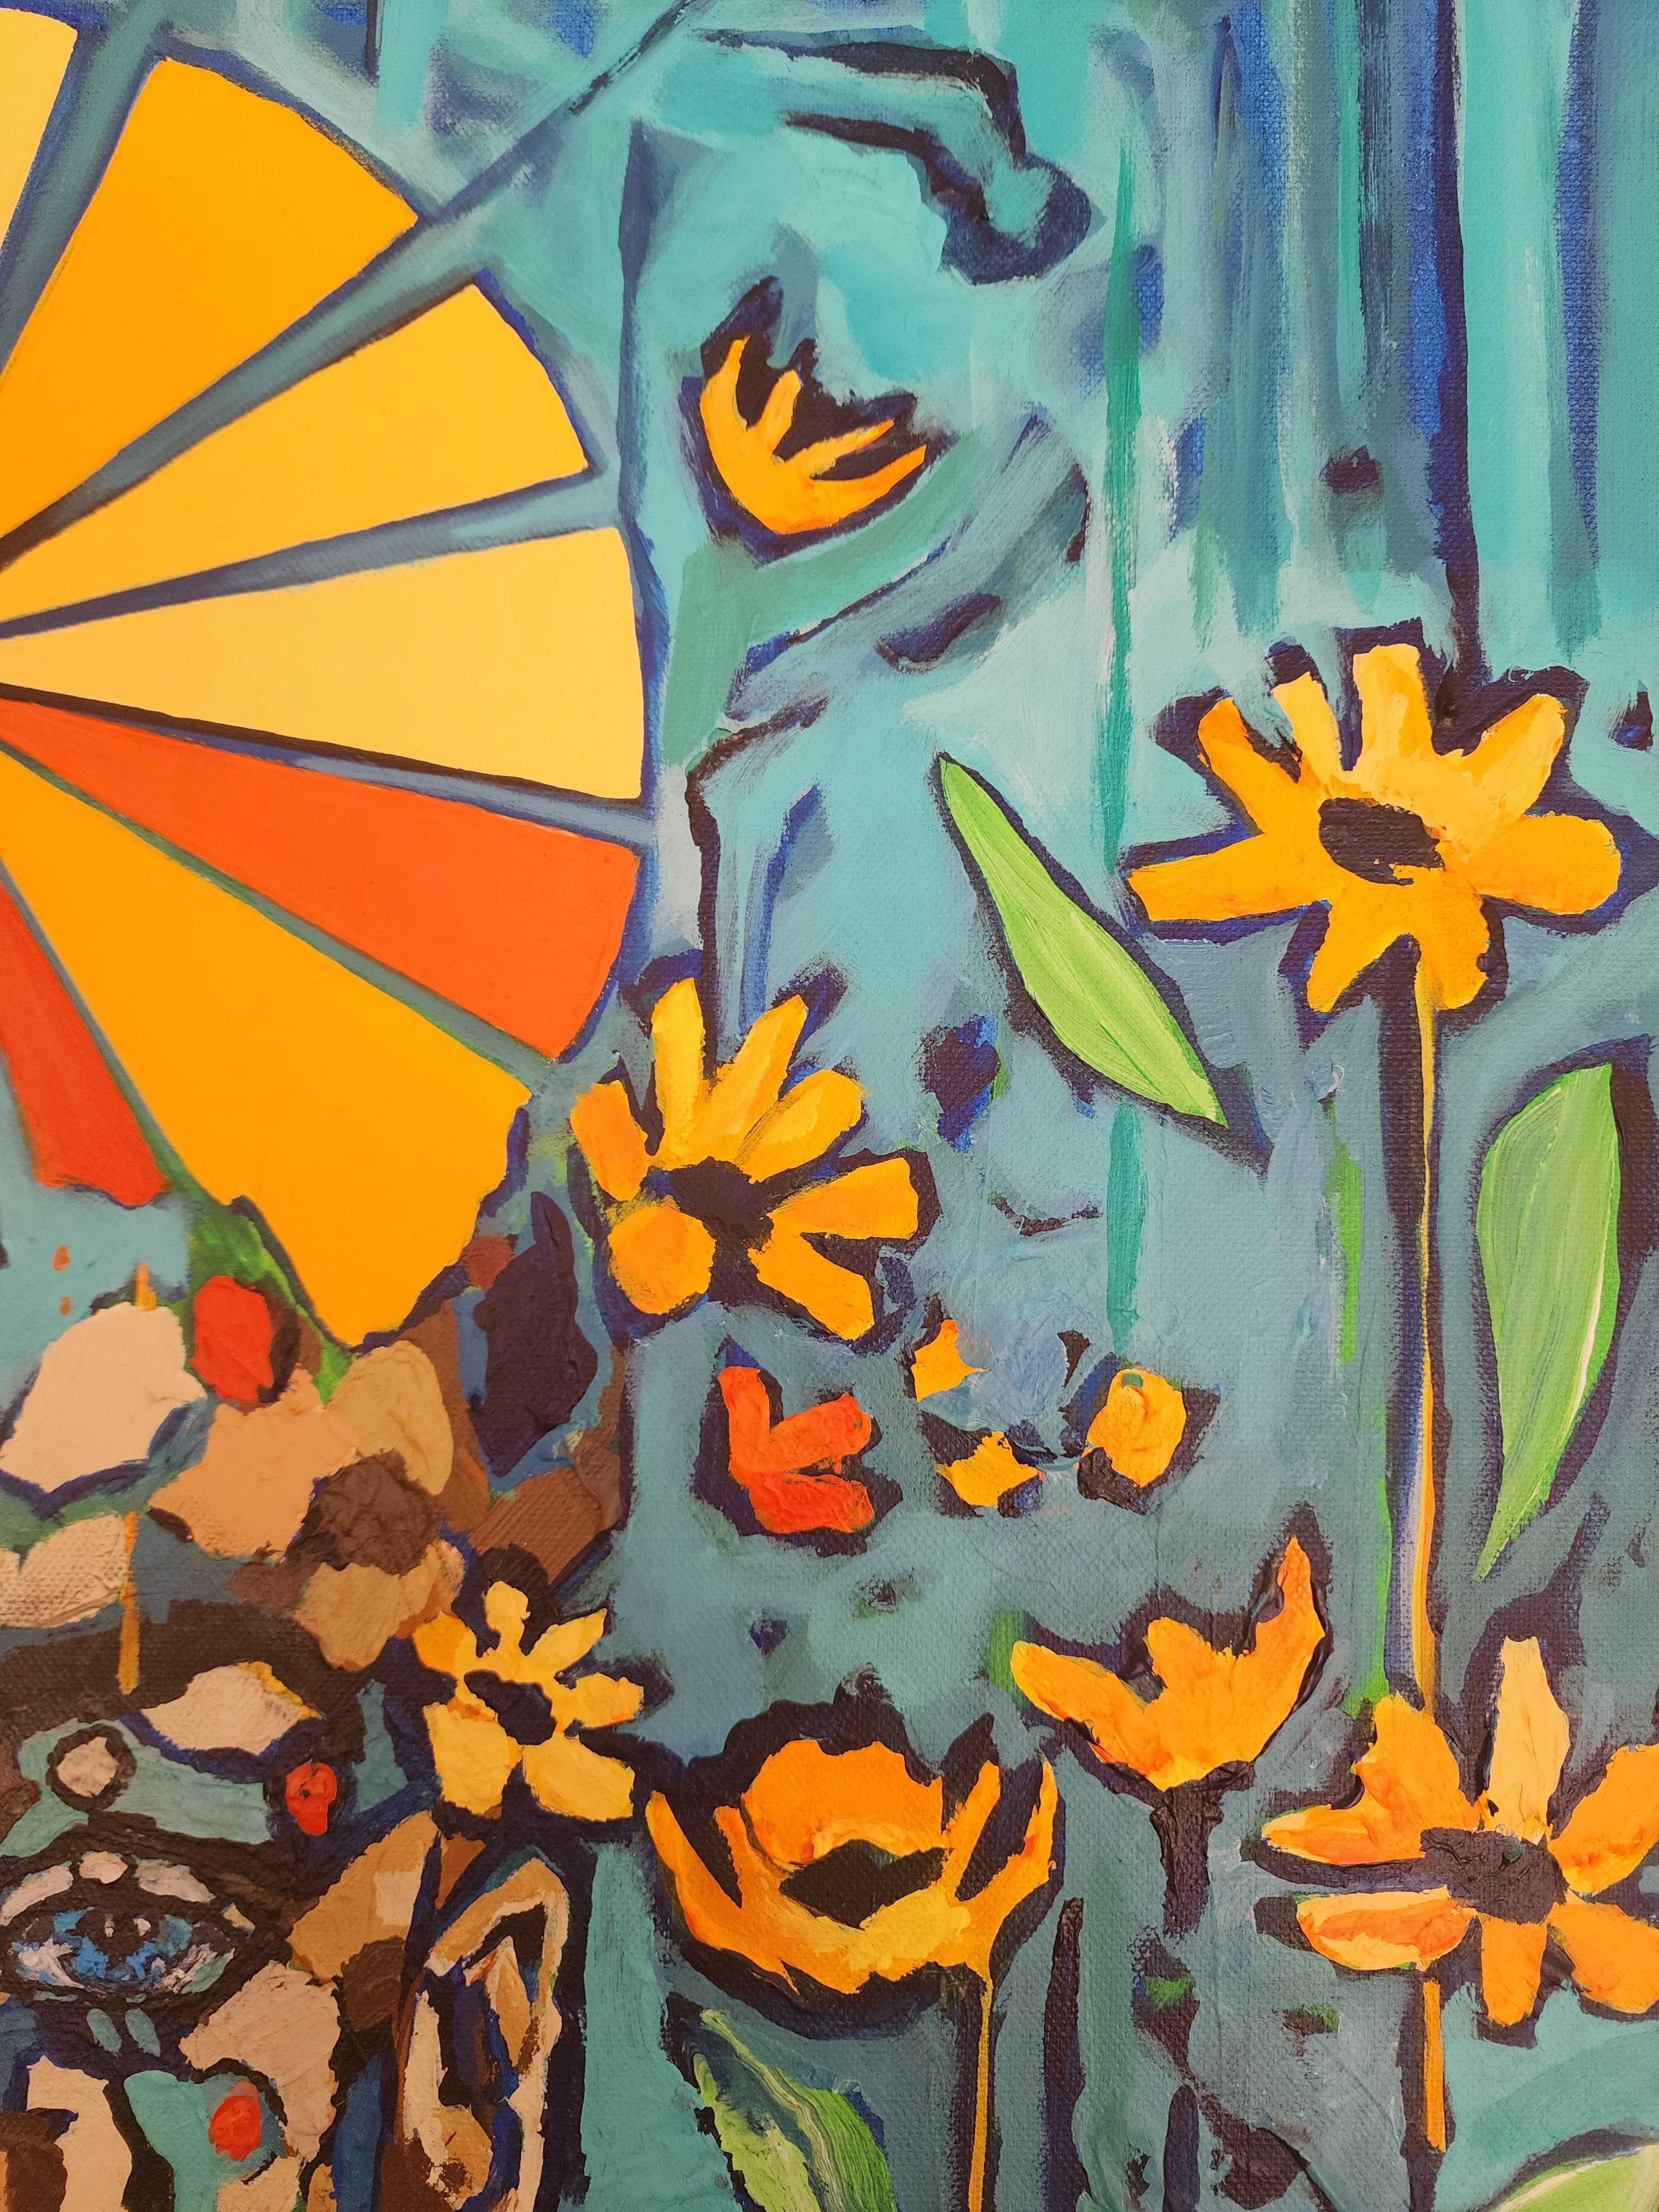 Title: Found You in Paradise

Figurative Nature Flowers Boy Seduction Striking Sun Pride Sunflower Van Gogh Muse Inspiration Eyes Piercing Blue Orange Vivid 

This artwork takes one to a place of contemplation, seduction, freedom and splendor.

 The